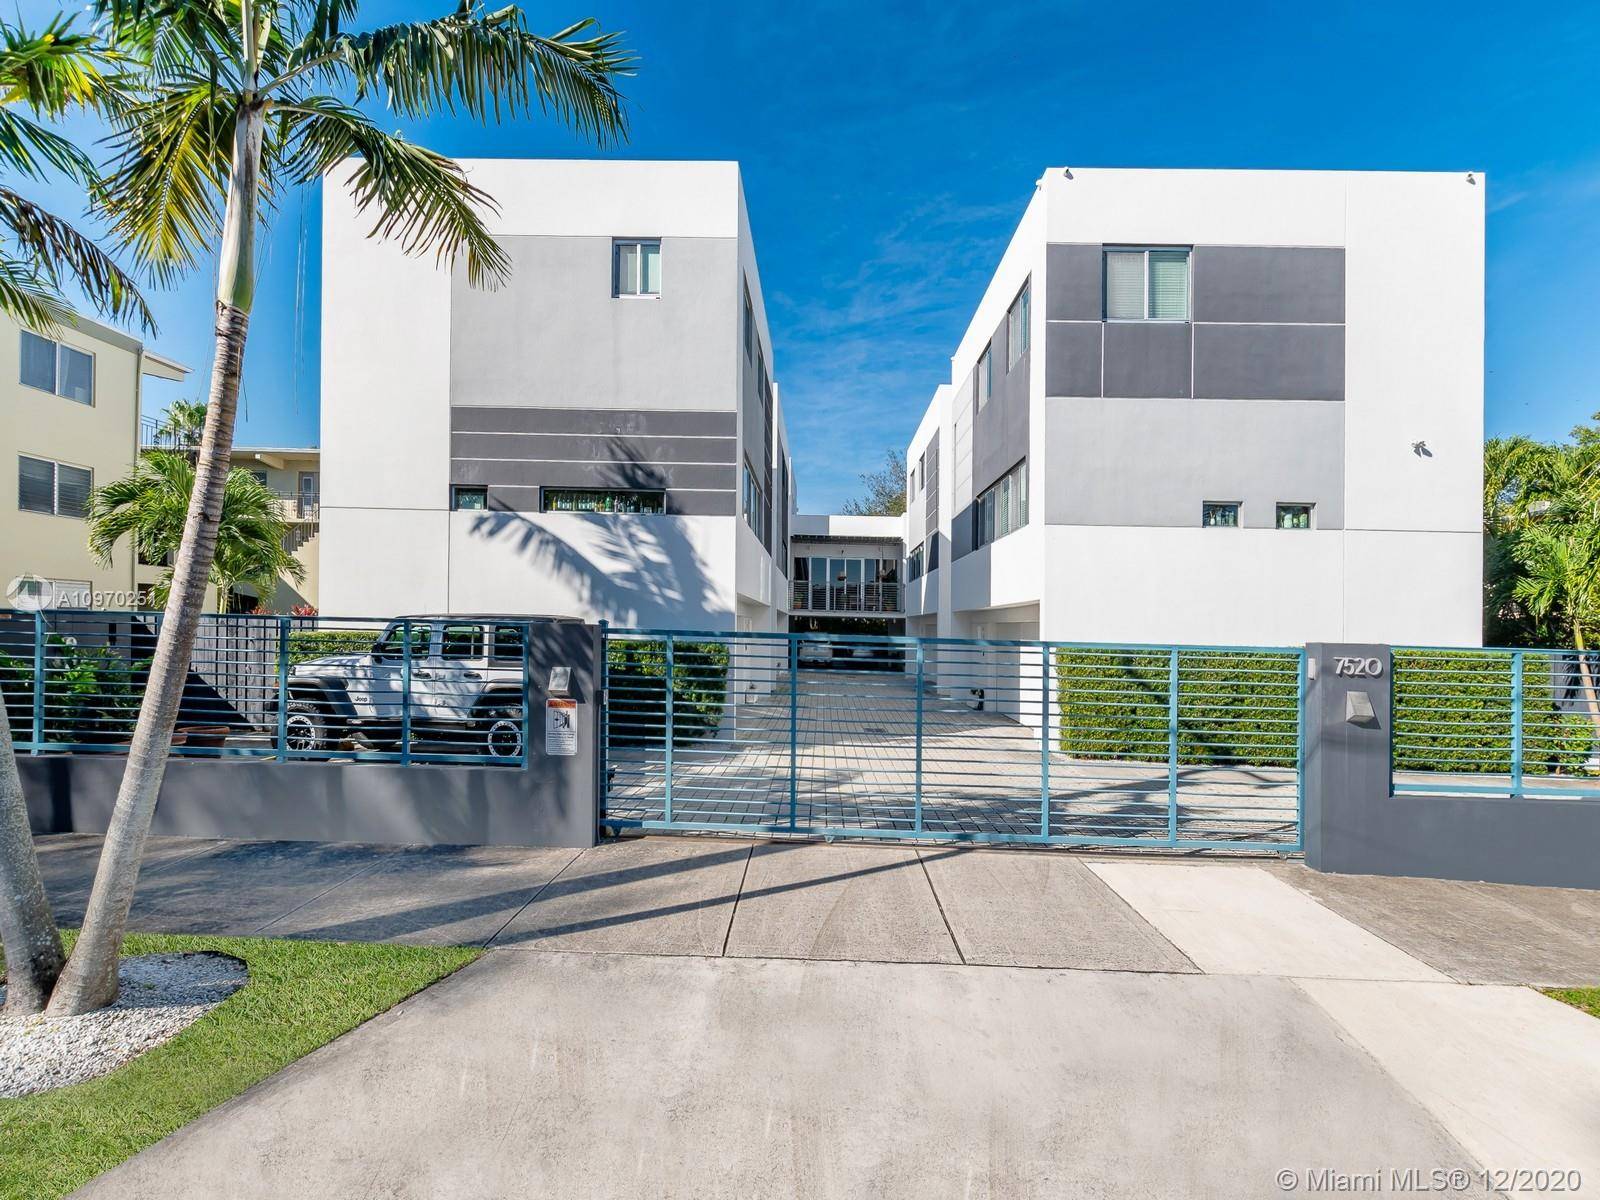 ONE OF A KIND 3 STORY TOWNHOUSE IN SOUTH MIAMI.